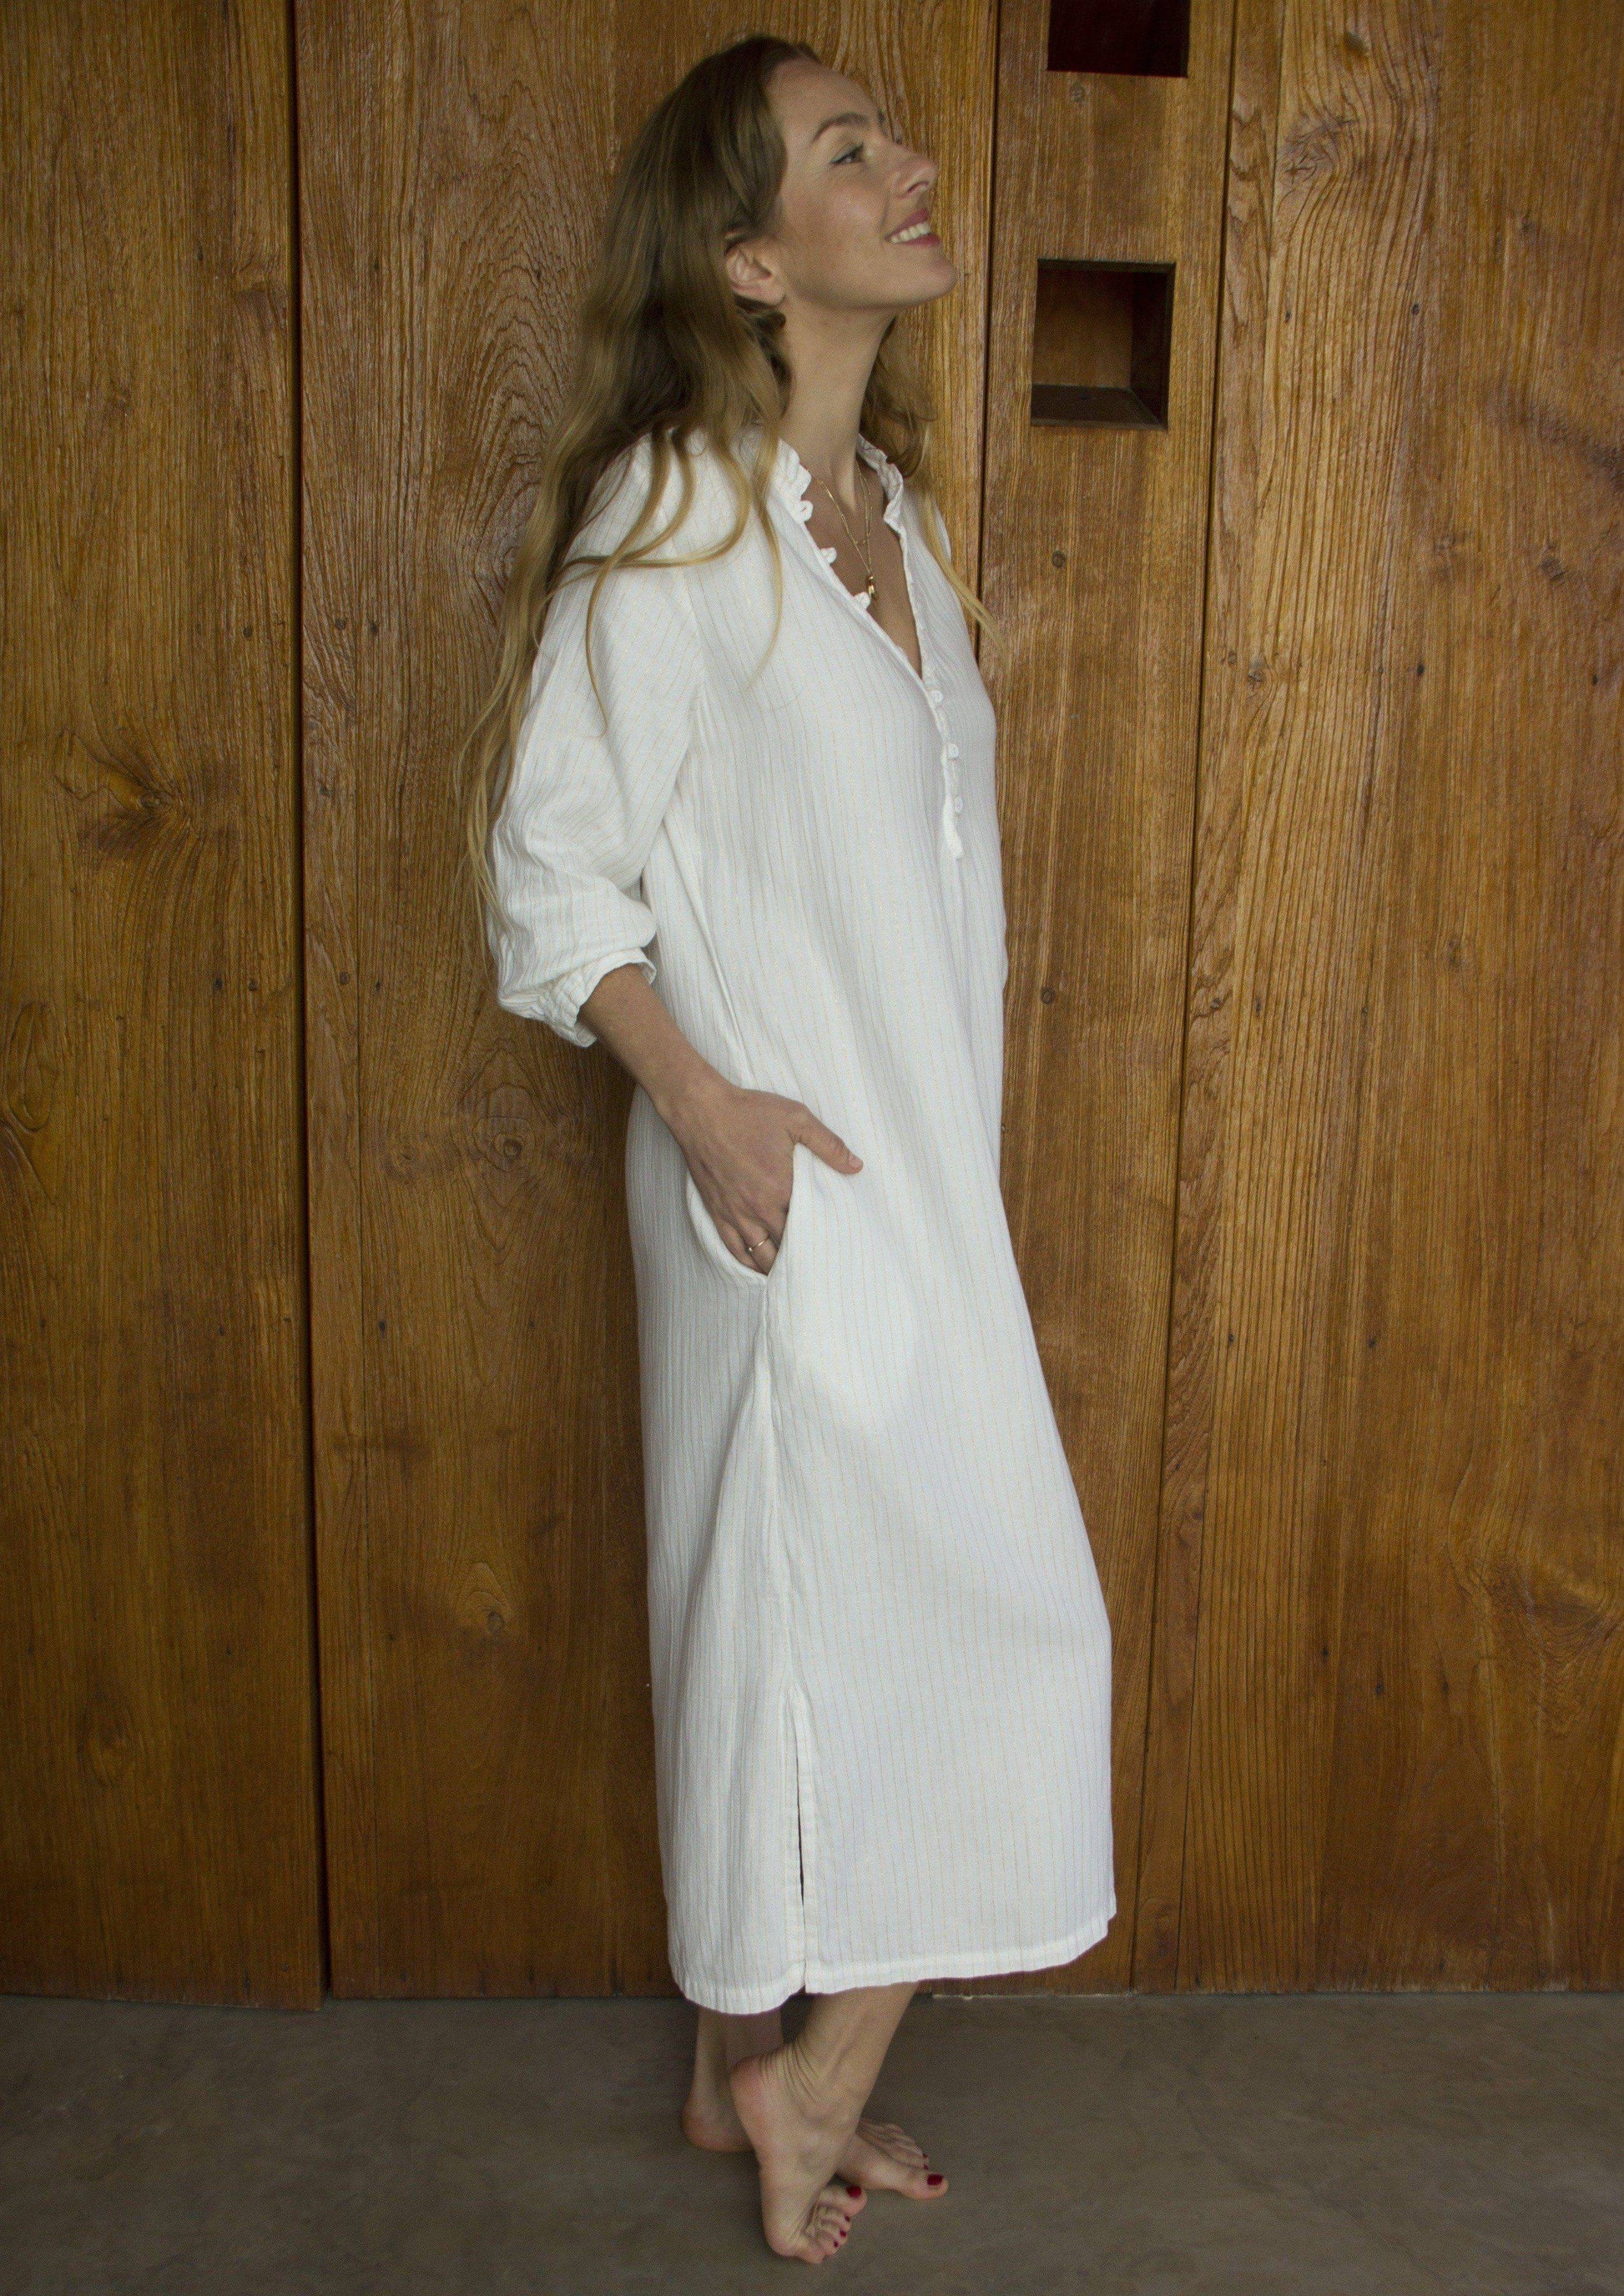 FRESNO dress • Soft cotton three-quarter-length dress featuring a button loop placket v-shaped neckline with mock collar, three quarter length button cuffed sleeves, side pockets, and side slits.